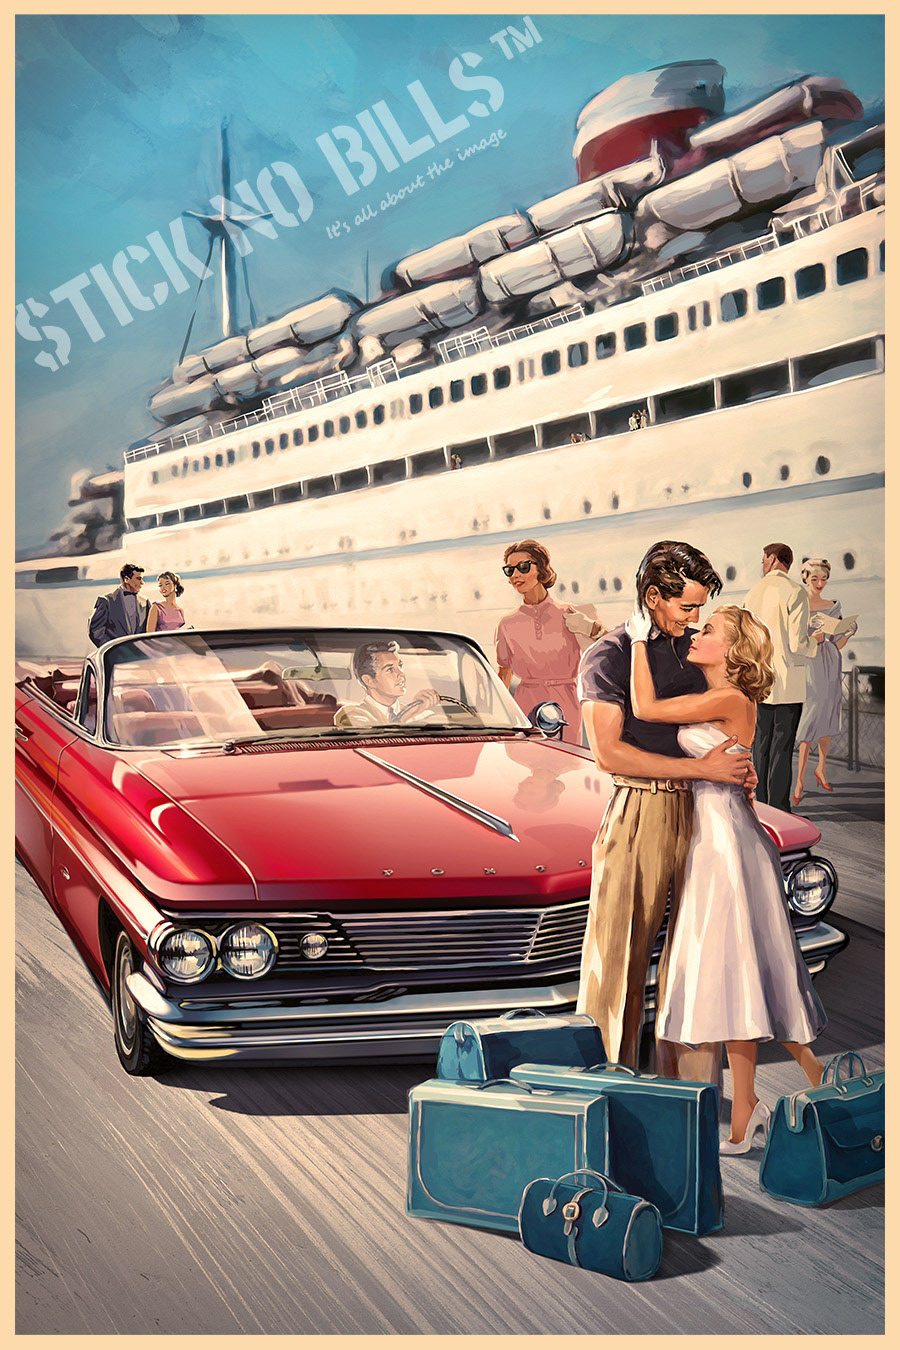 vintage Travel pin-up ship gerl oldscool Retro poster car